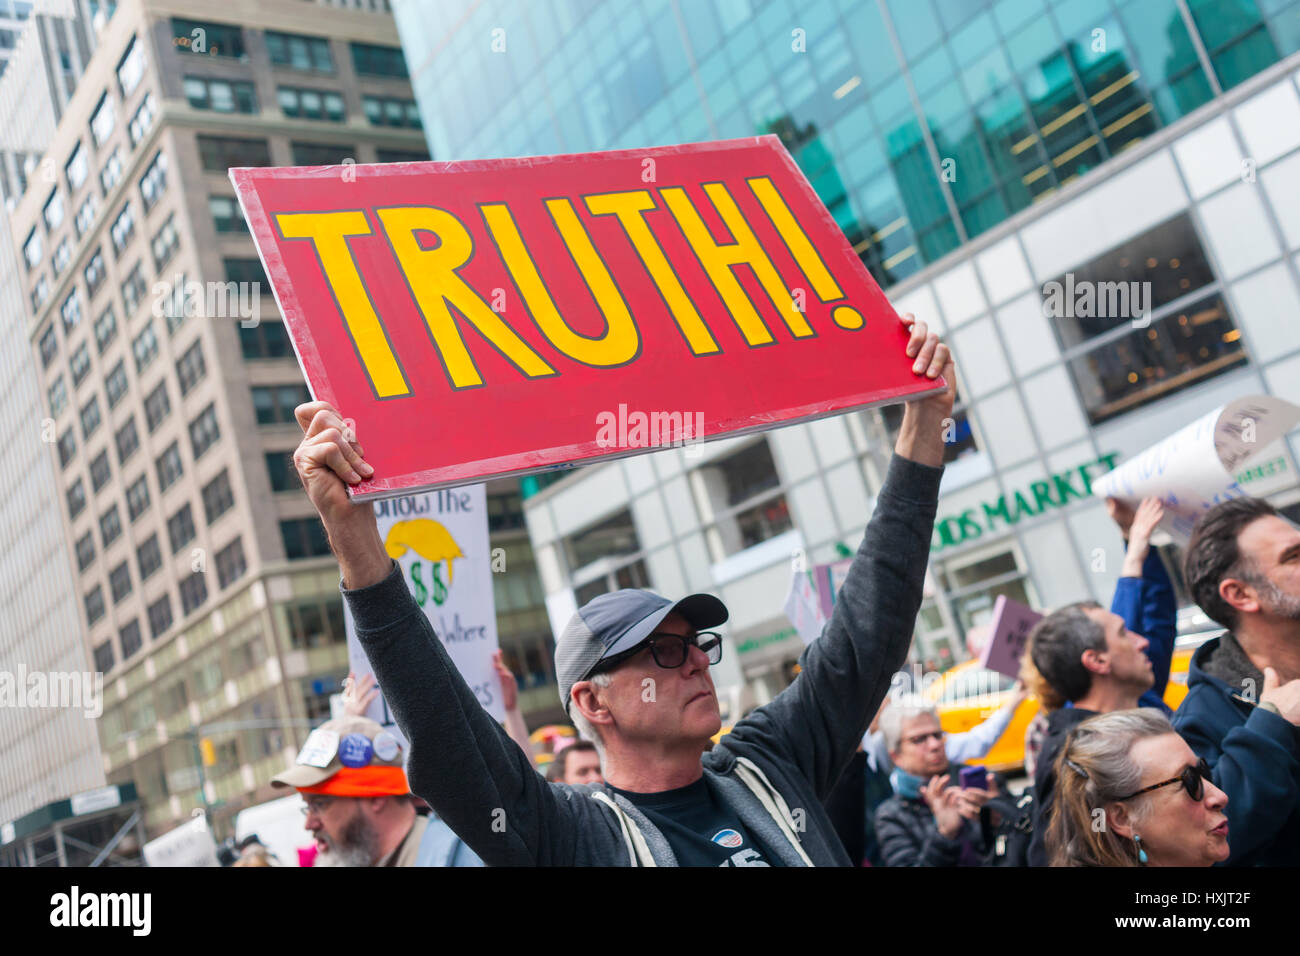 Activists rally in Bryant Park in New York prior to marching to the New York Times building in midtown Manhattan on Saturday, March 25, 2017. The rally was in response to President Donald Trump and his administration's war on the media. (© Richard B. Levine) Stock Photo